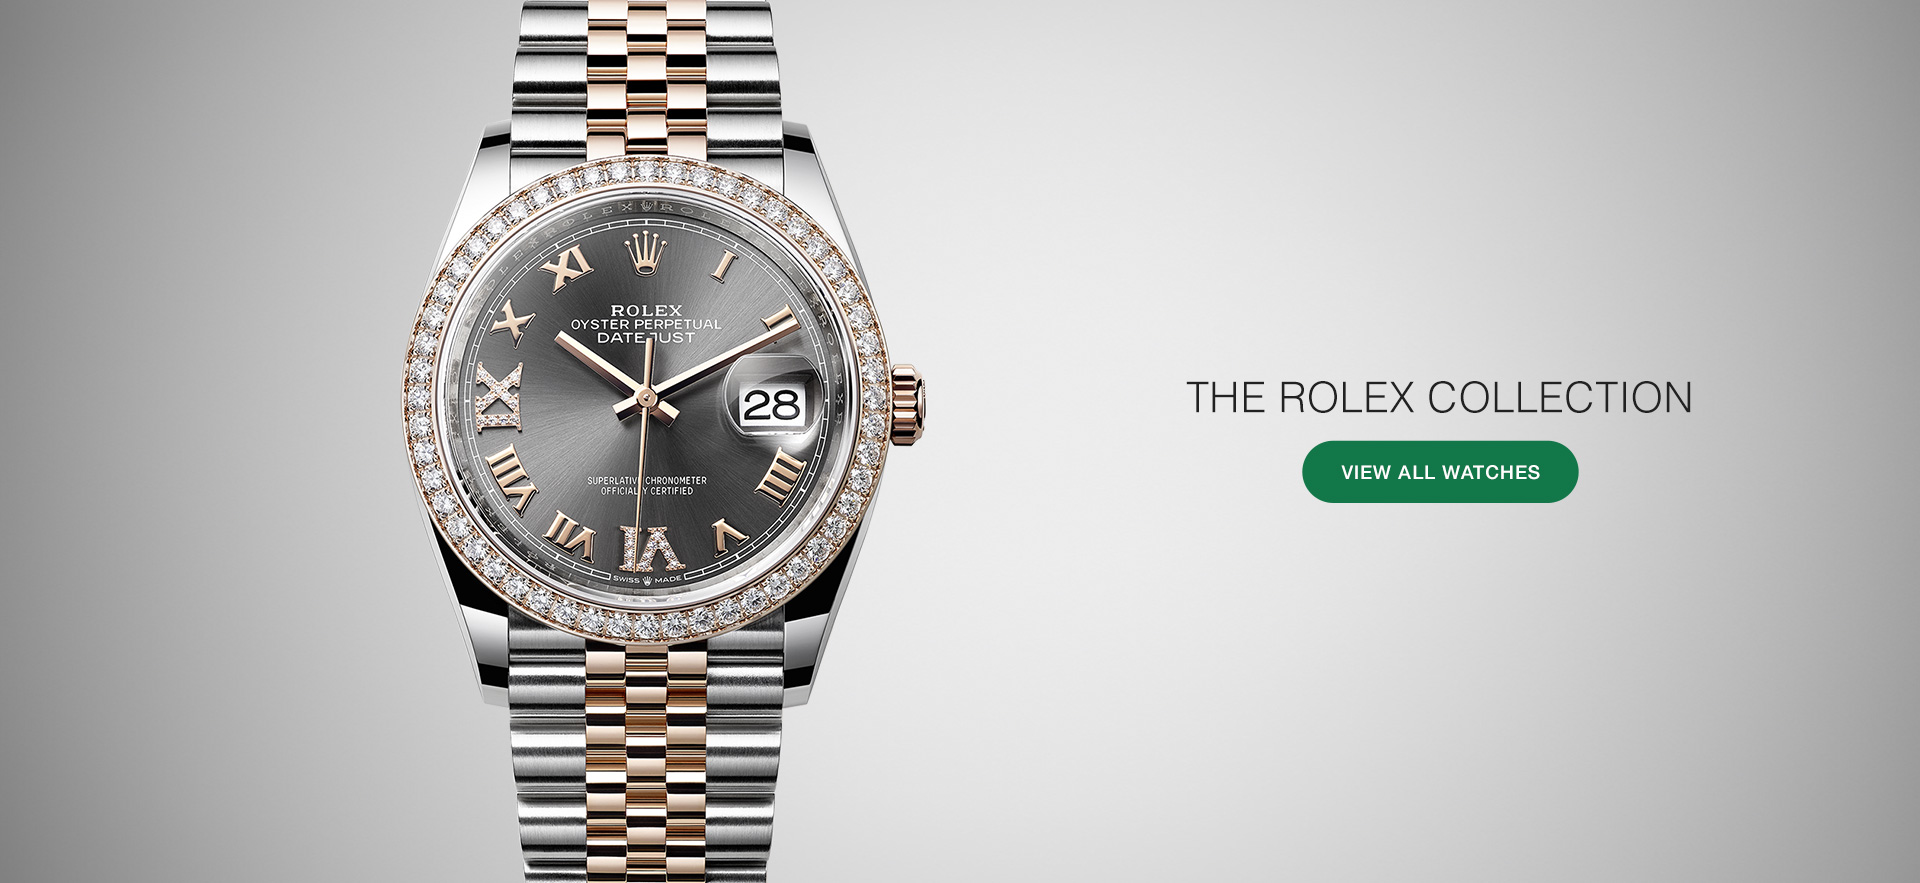 Fake Rolex Vs. Real: an NYC Watch Dealer Tells You How to Spot a Fake Rolex